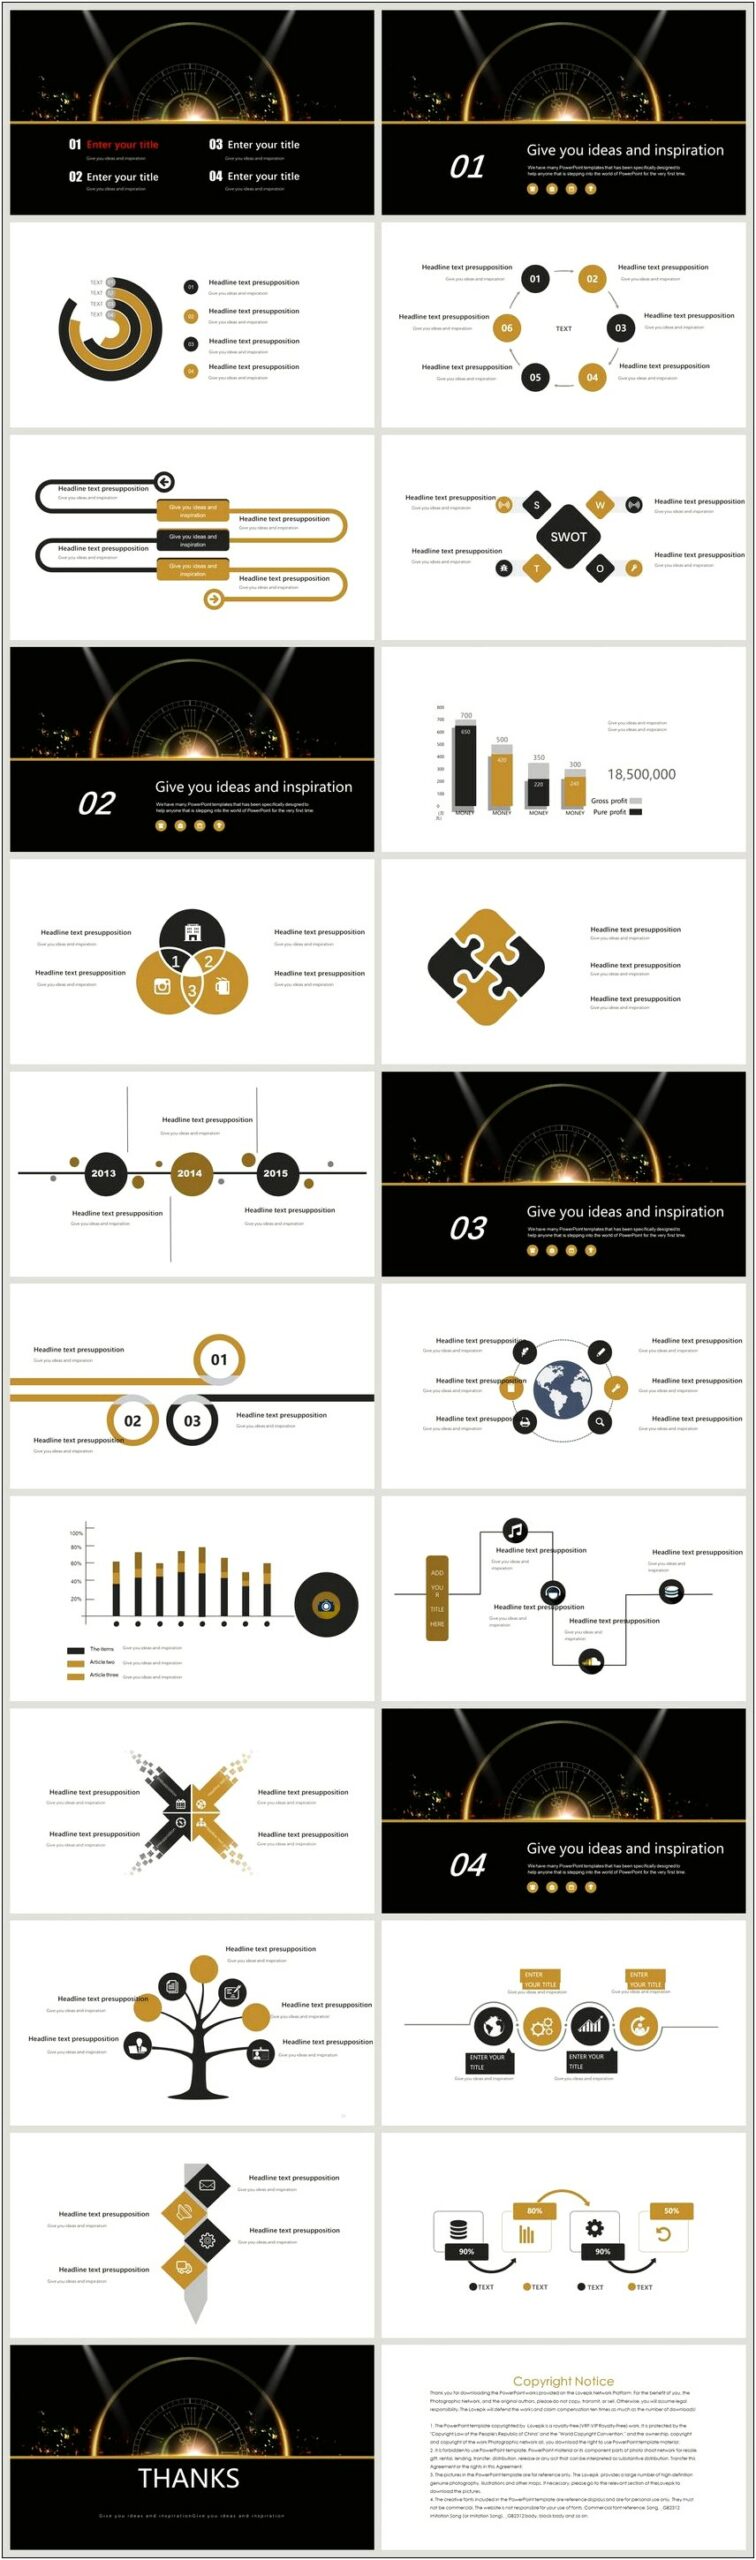 Financial Report Full Hd Powerpoint Template Free Download